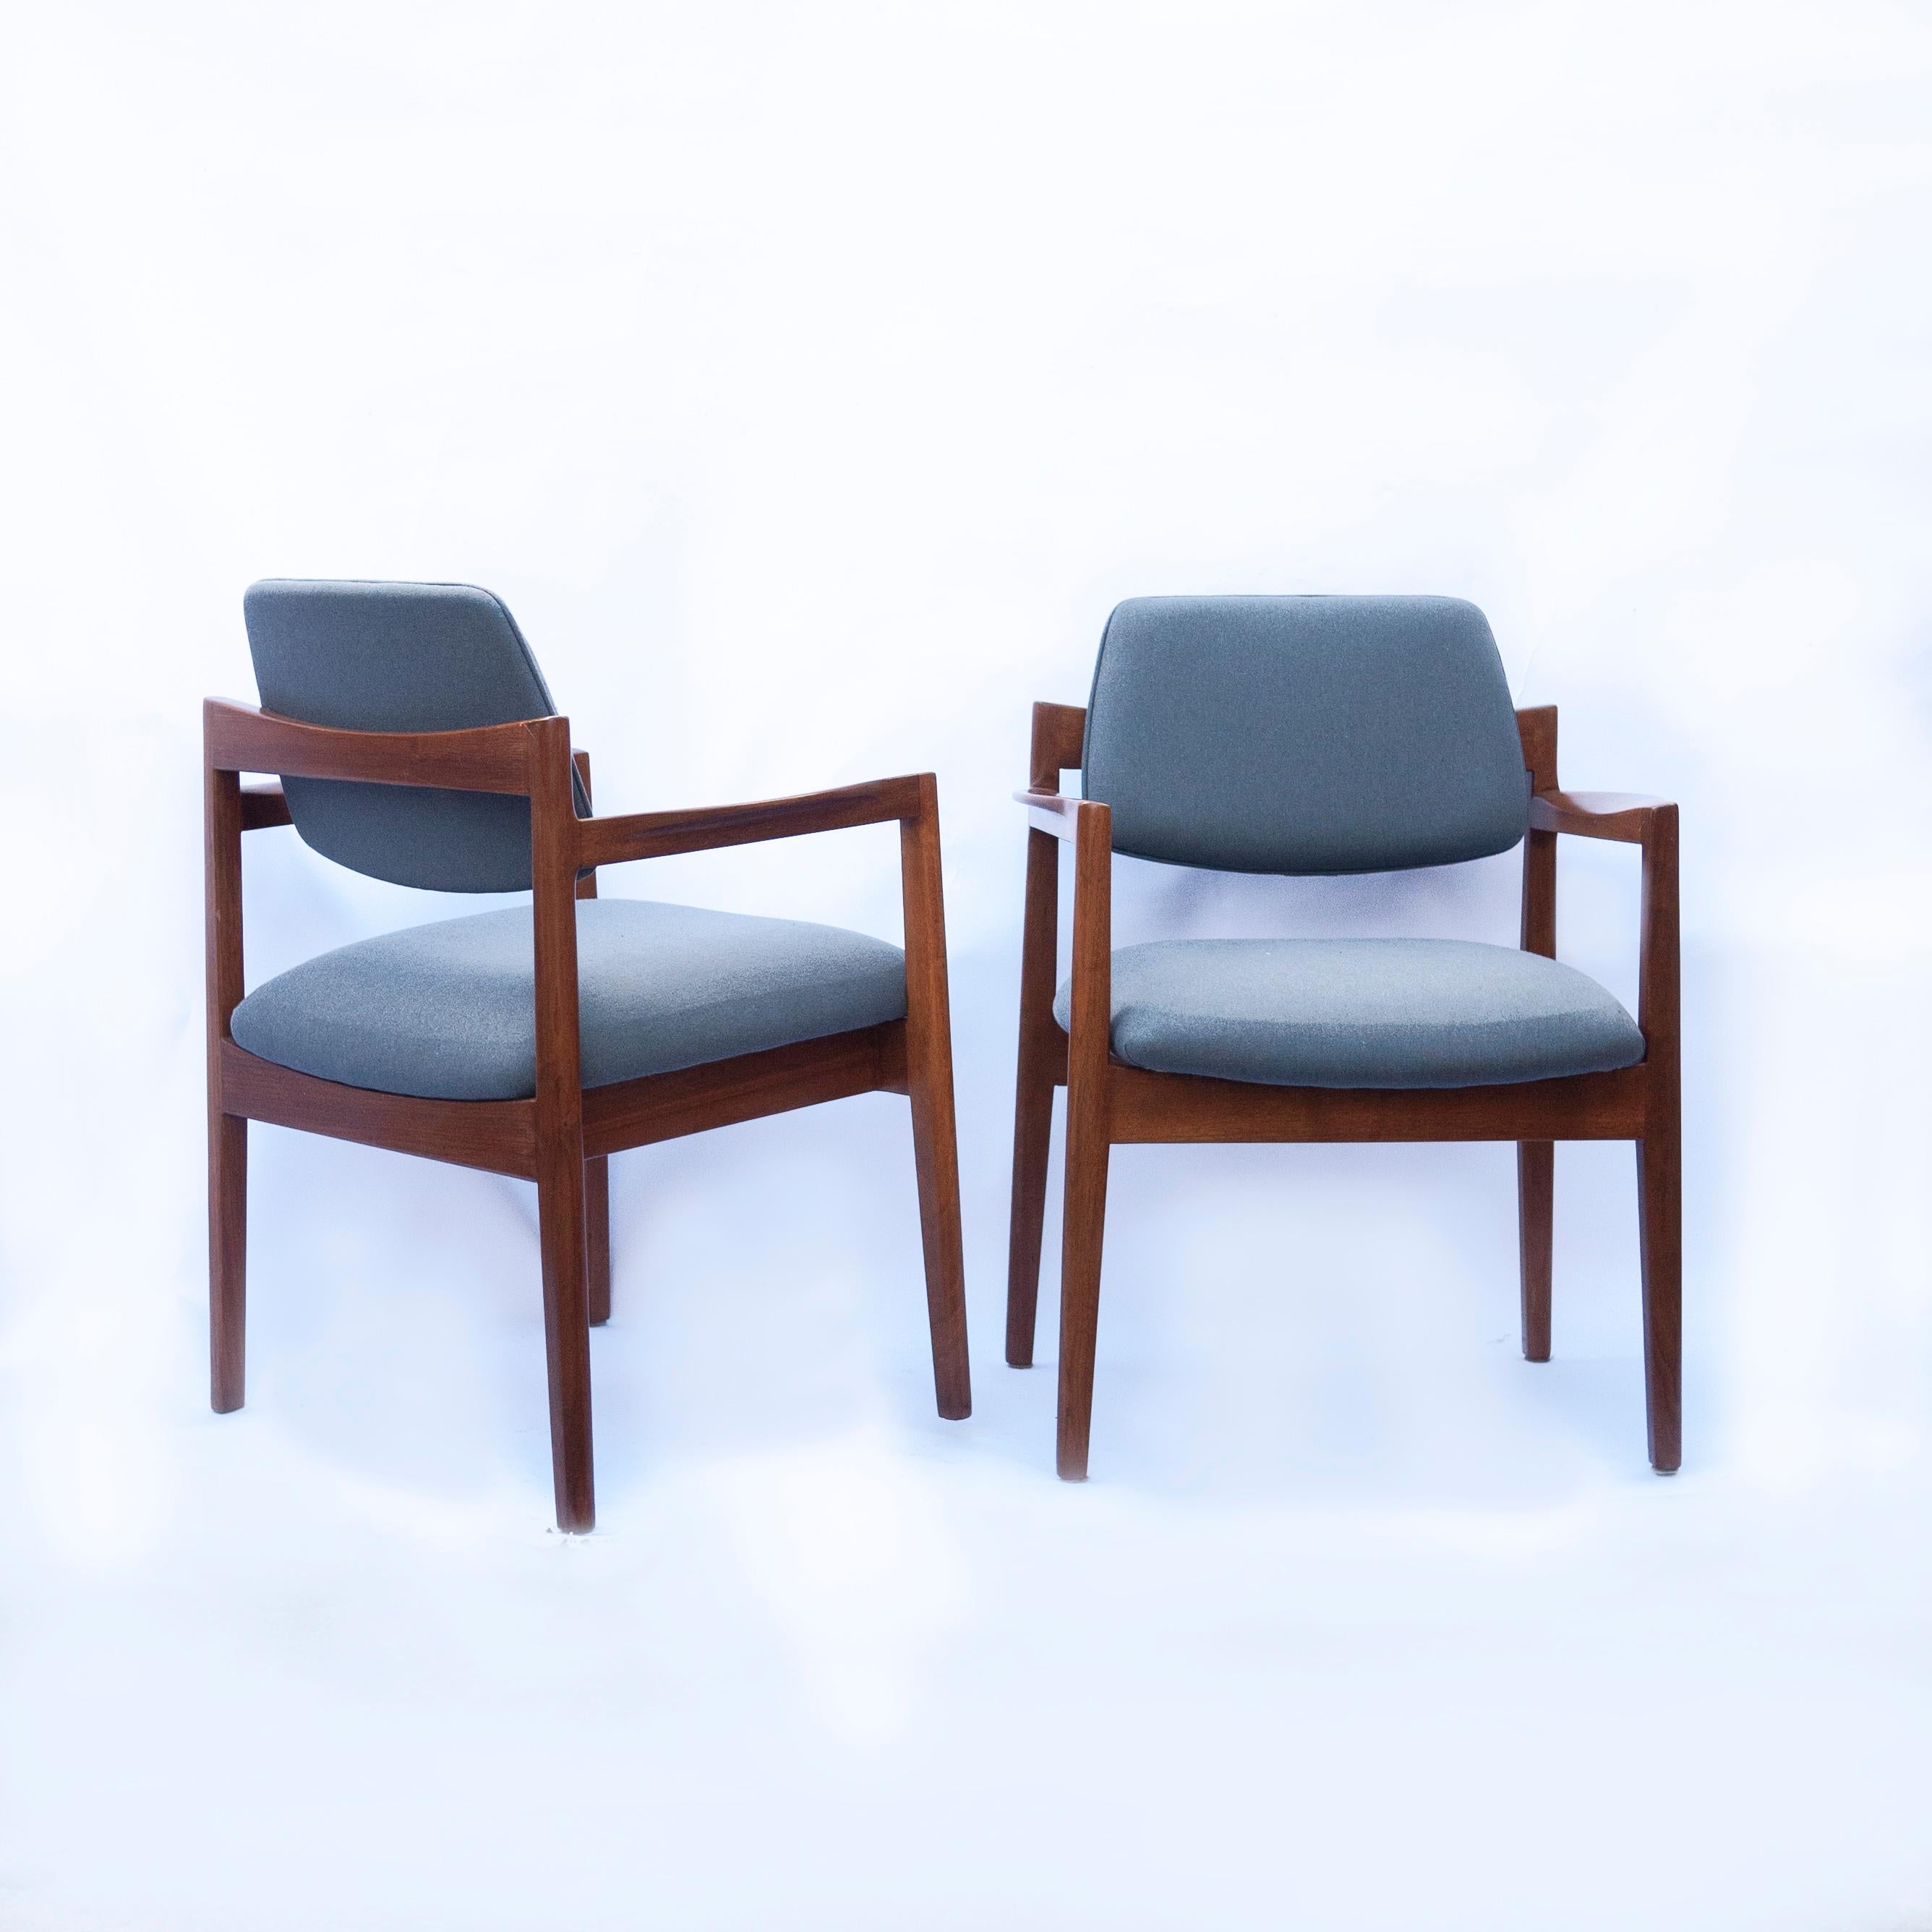 Pair of Arm Chairs by Jens Risom for Knoll in Walnut and Newly Upholstered  For Sale 4